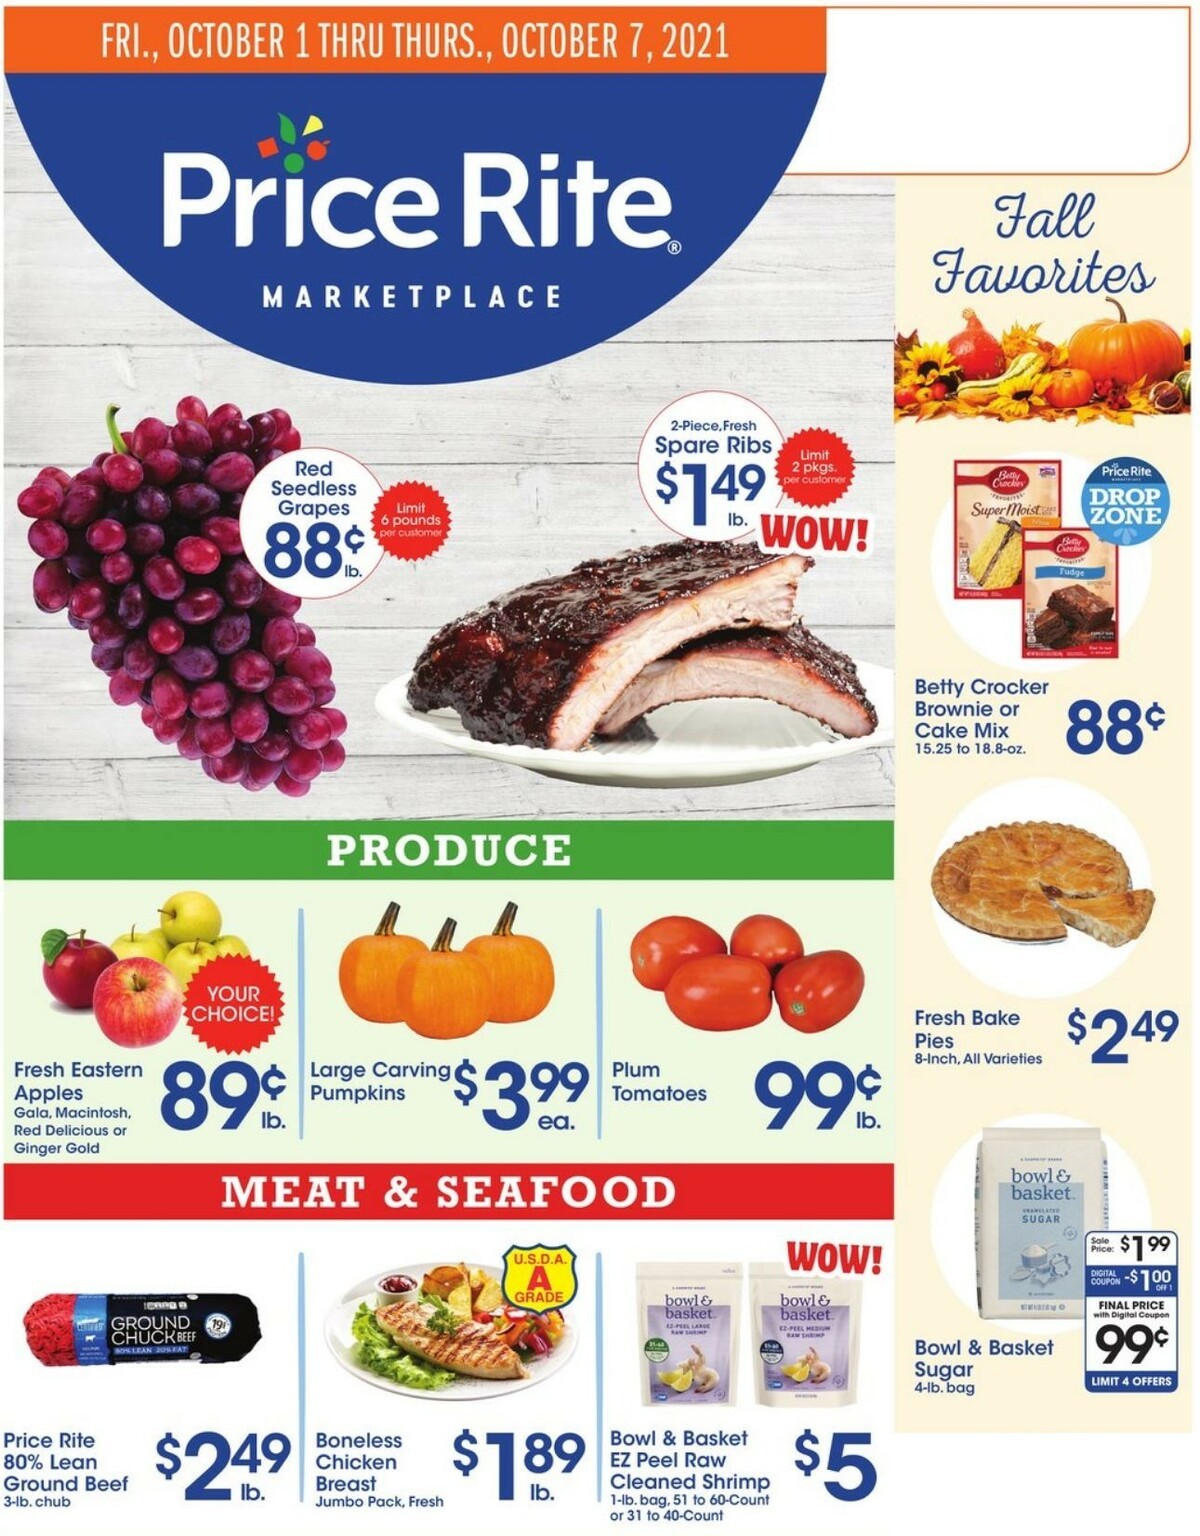 Price Rite Weekly Ad from October 1